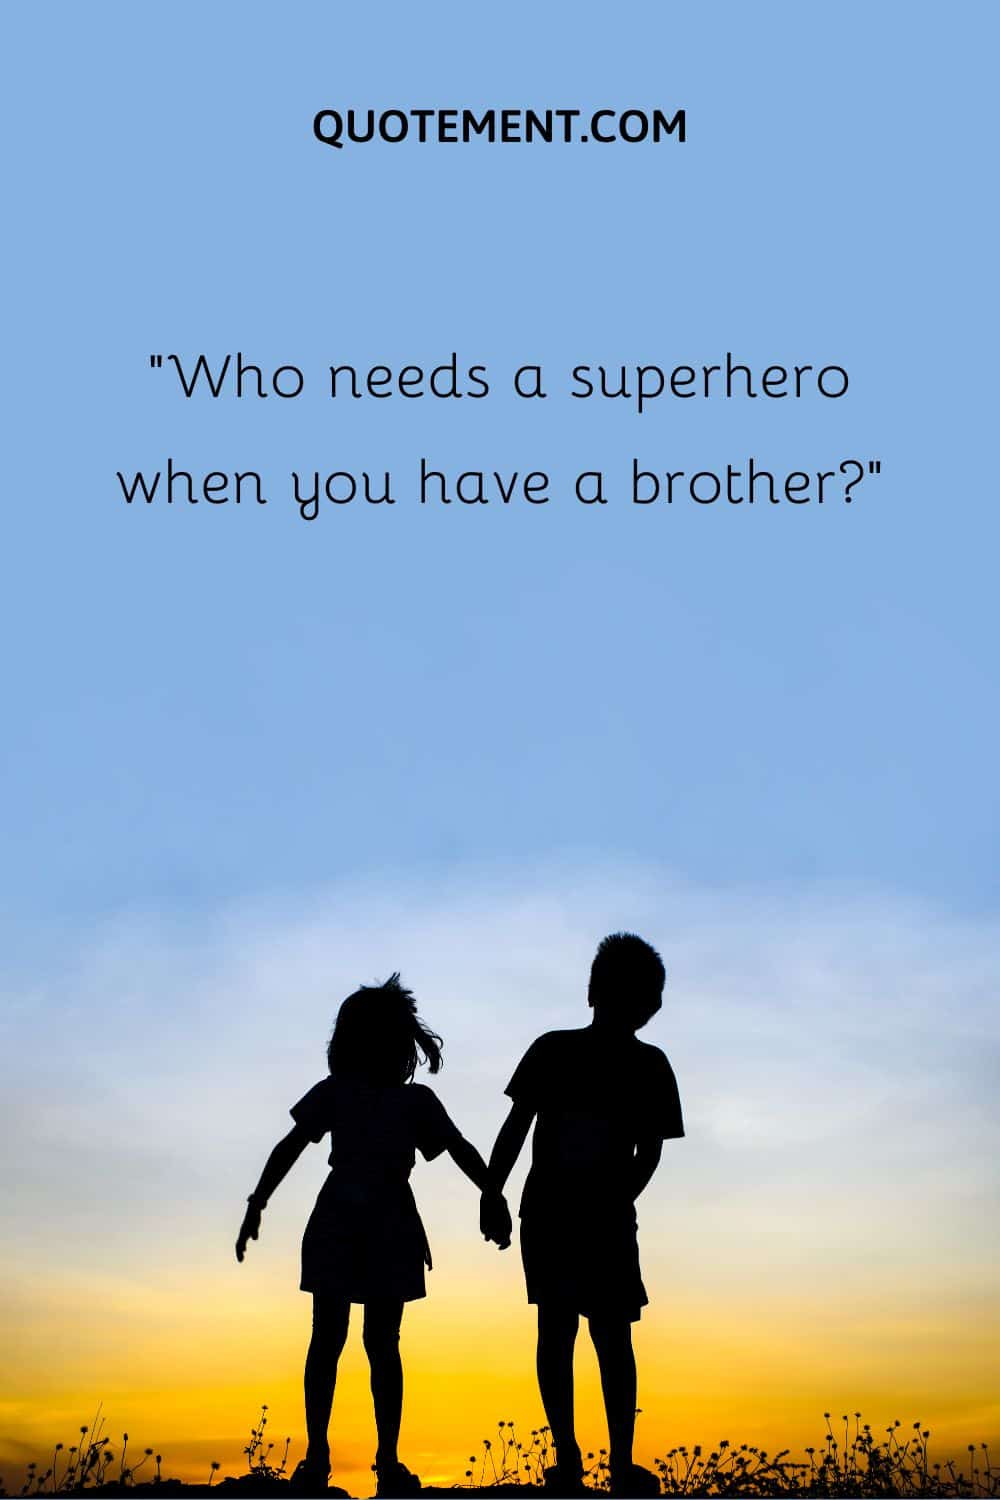 “Who needs a superhero when you have a brother”